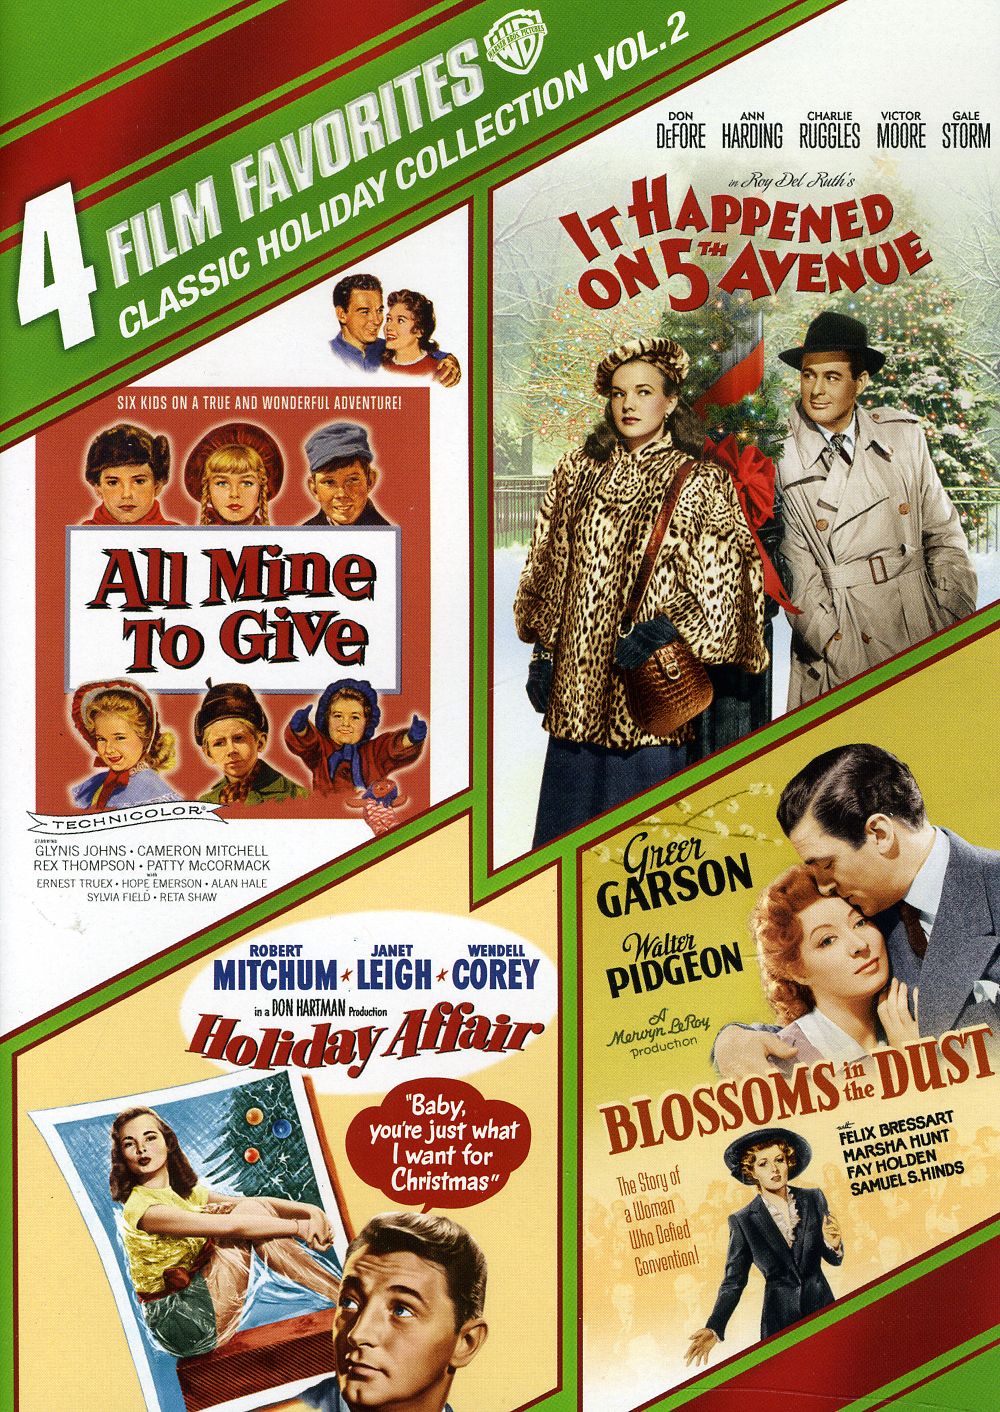 4 FILM FAVORITES: CLASSIC HOLIDAY COLLECTION 2